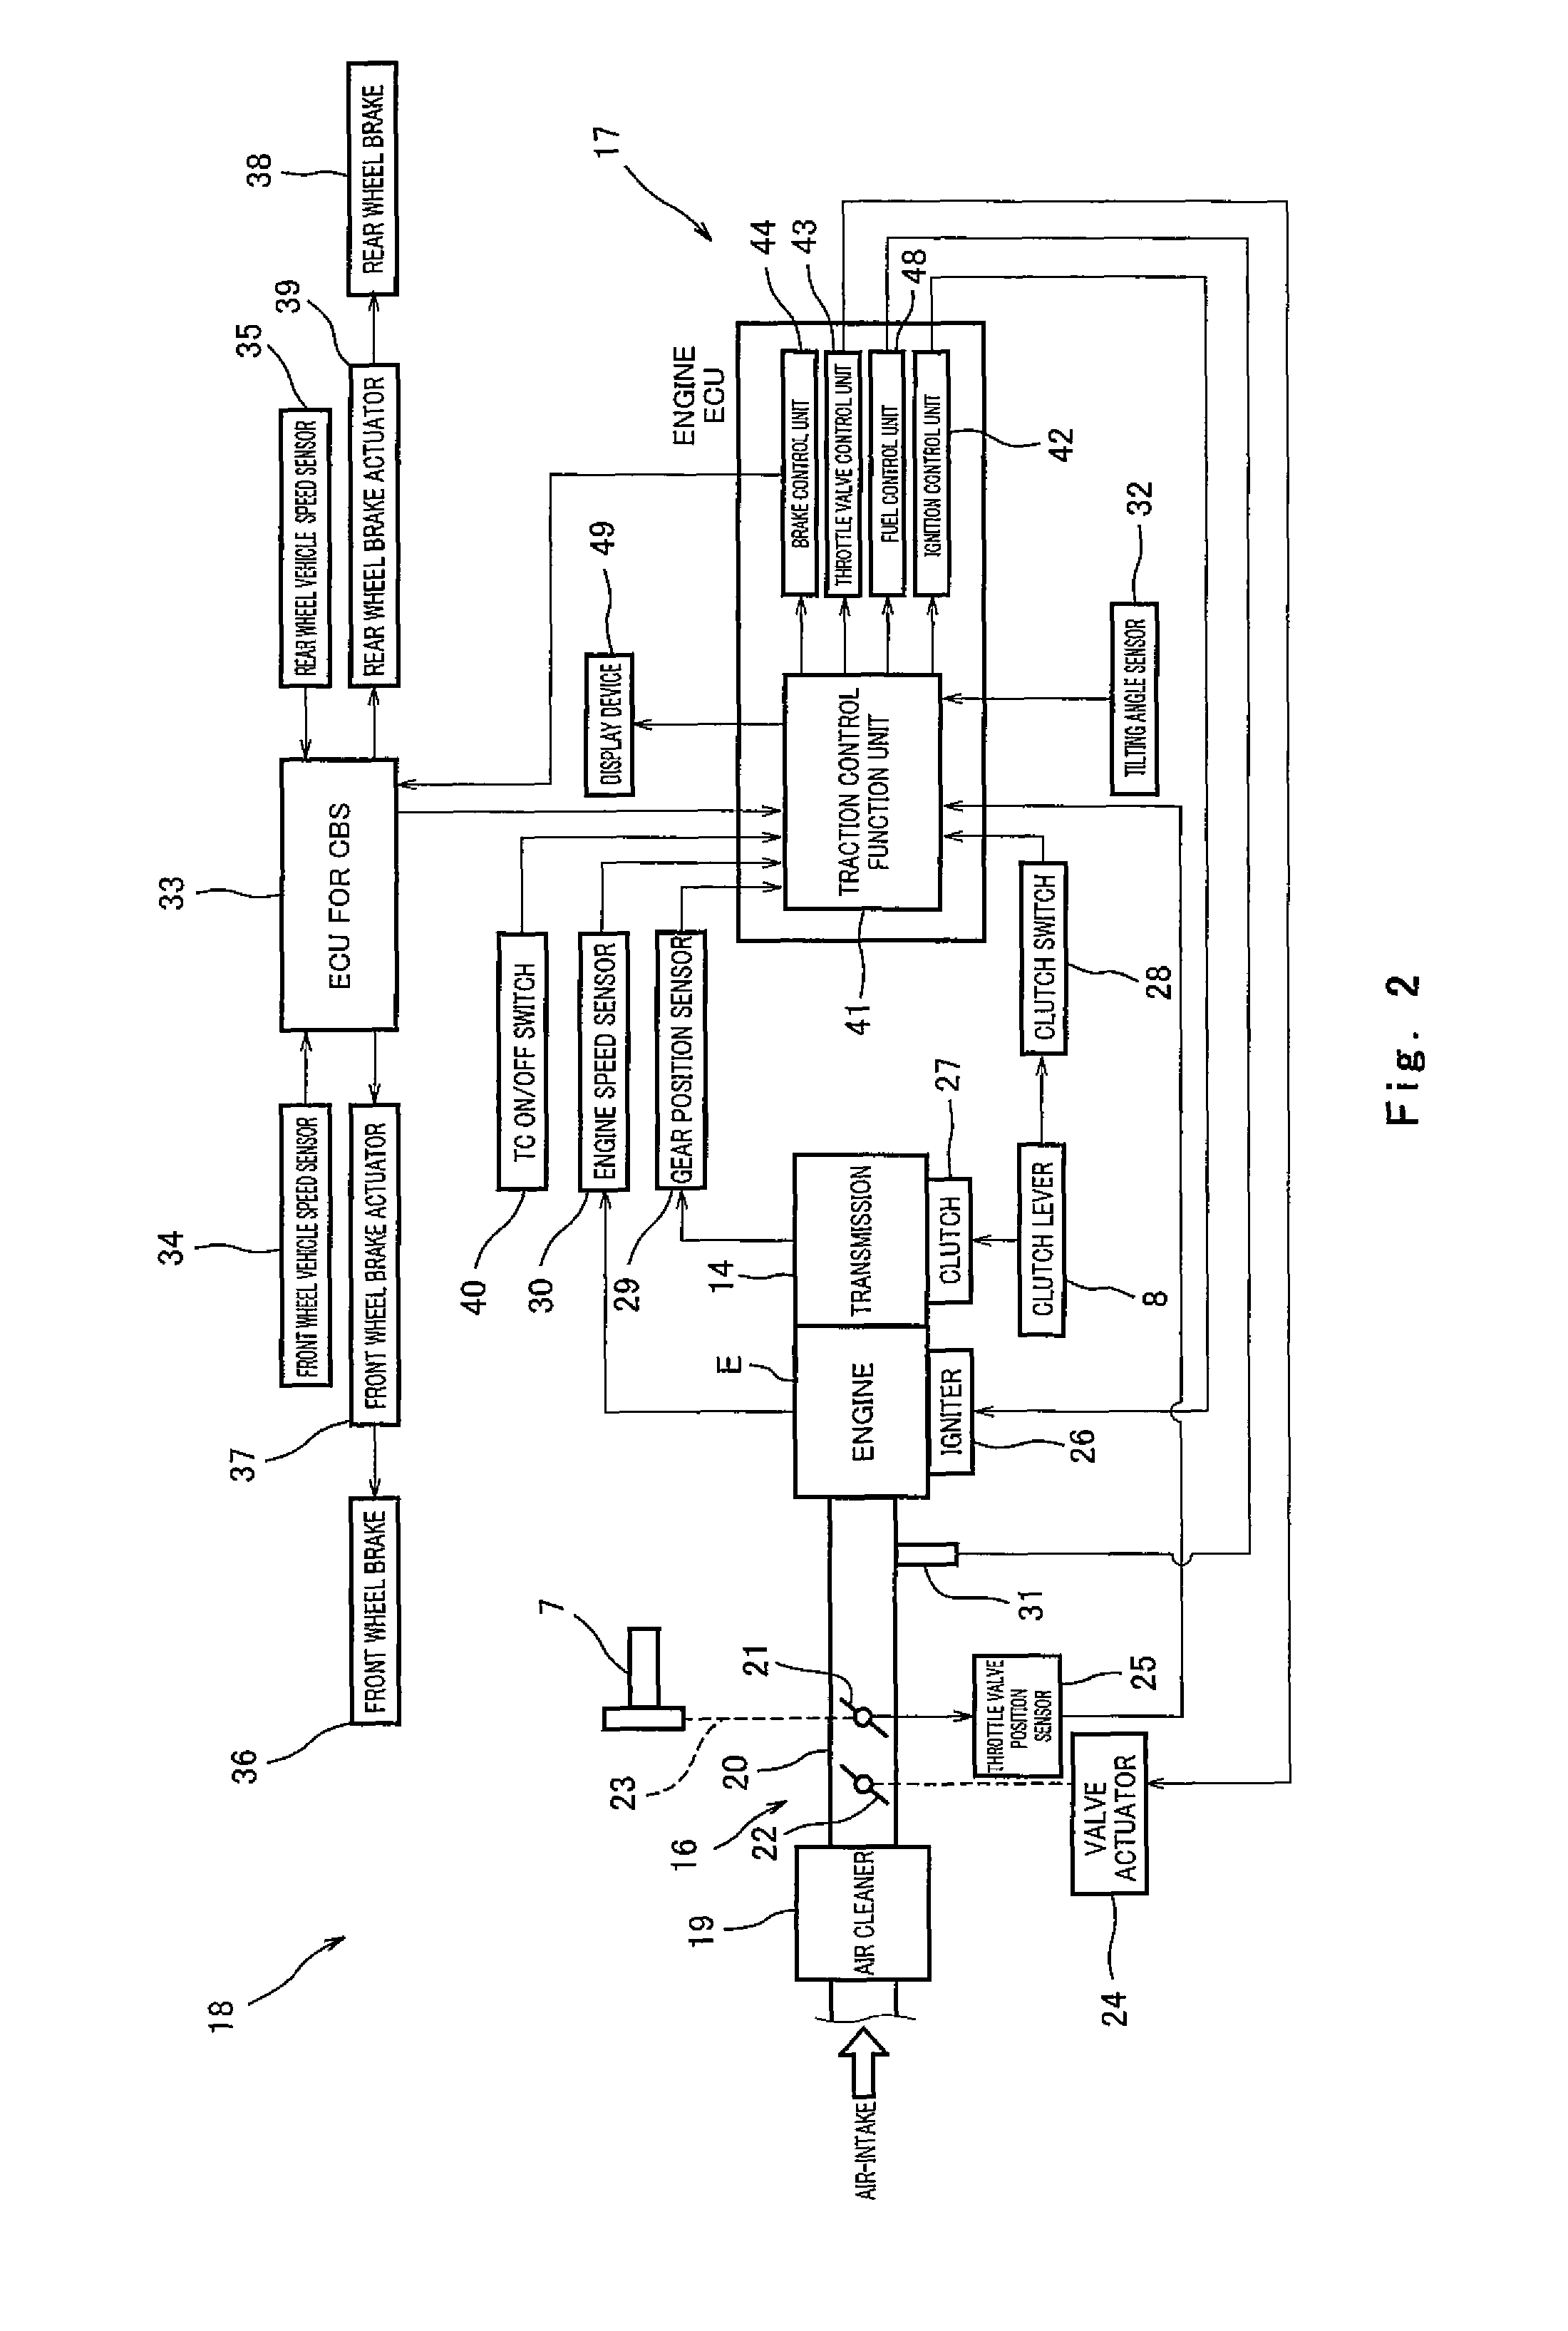 Slip suppression control for a motorcycle with an on/off input device